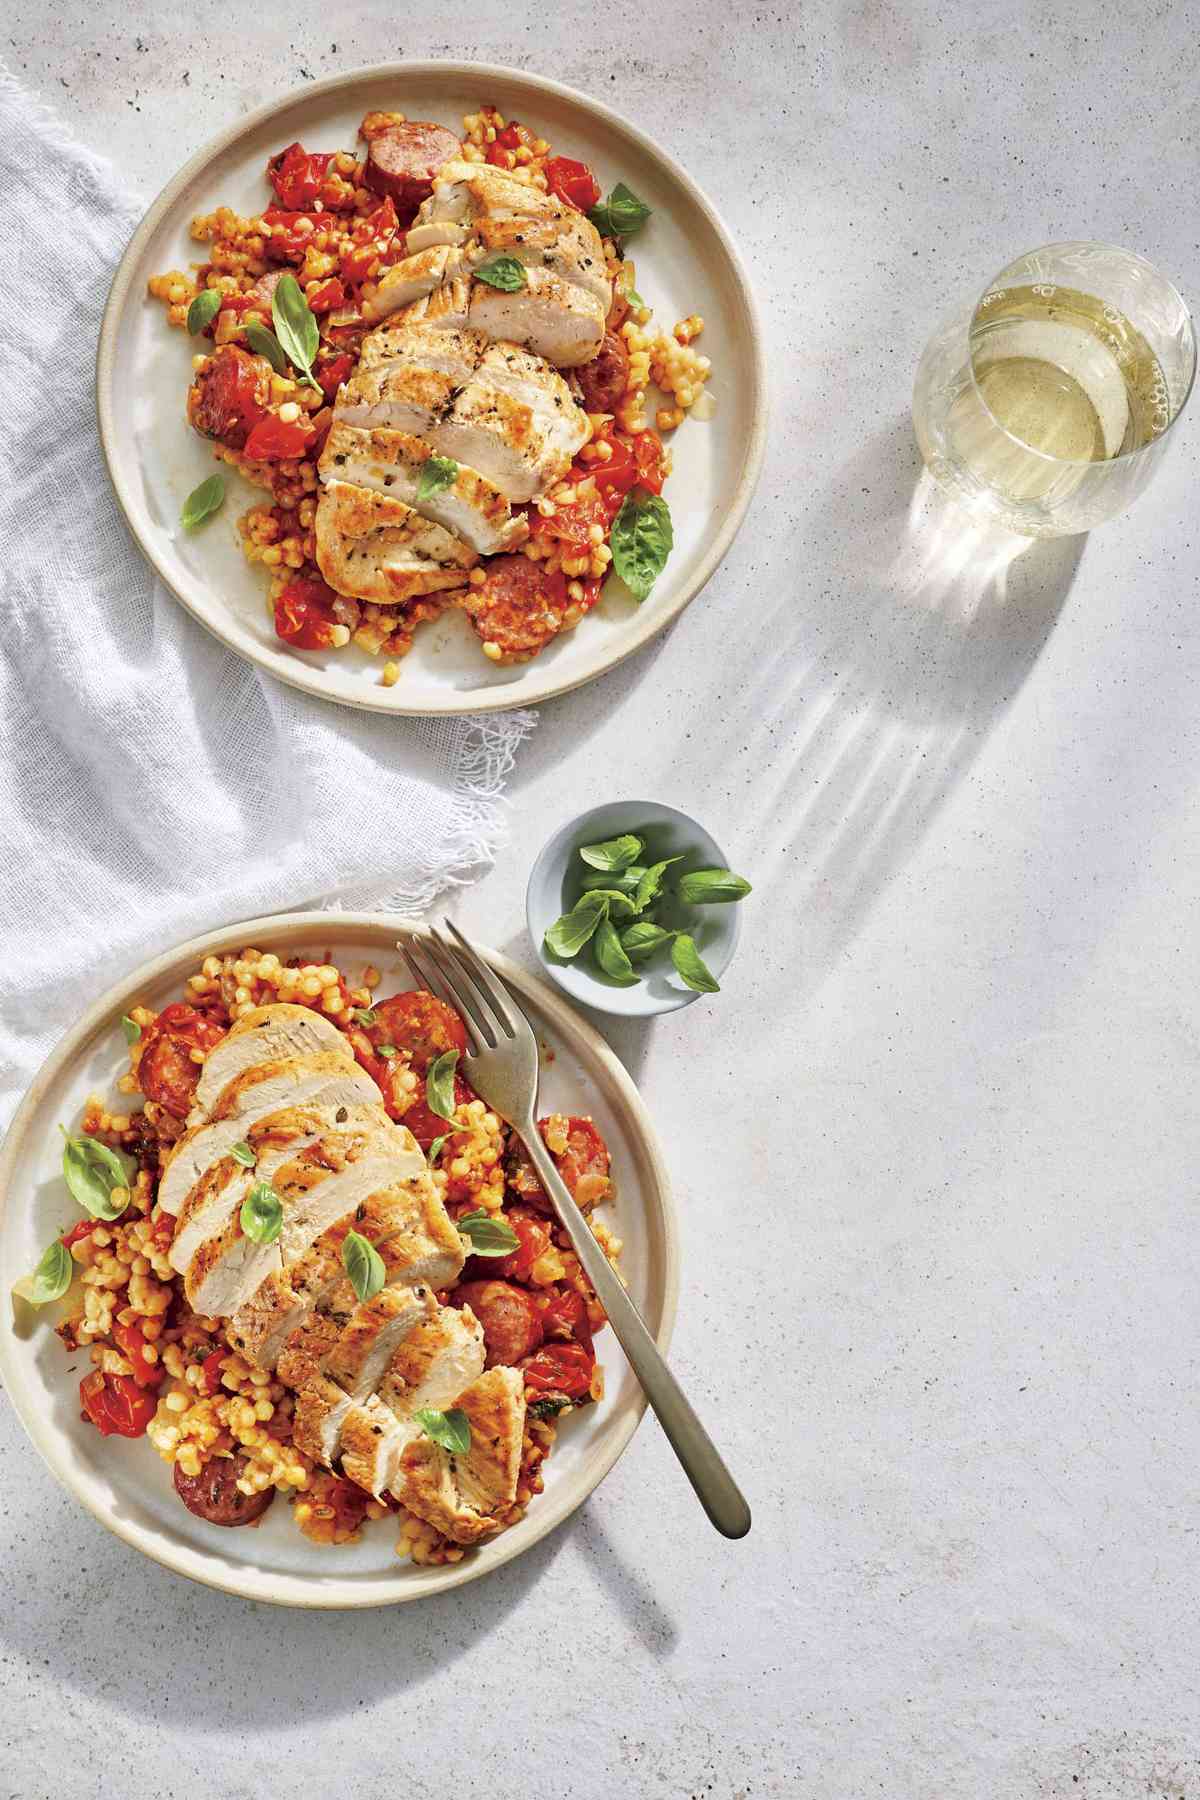 Tomato-Basil Couscous with Chicken and Smoked Sausage